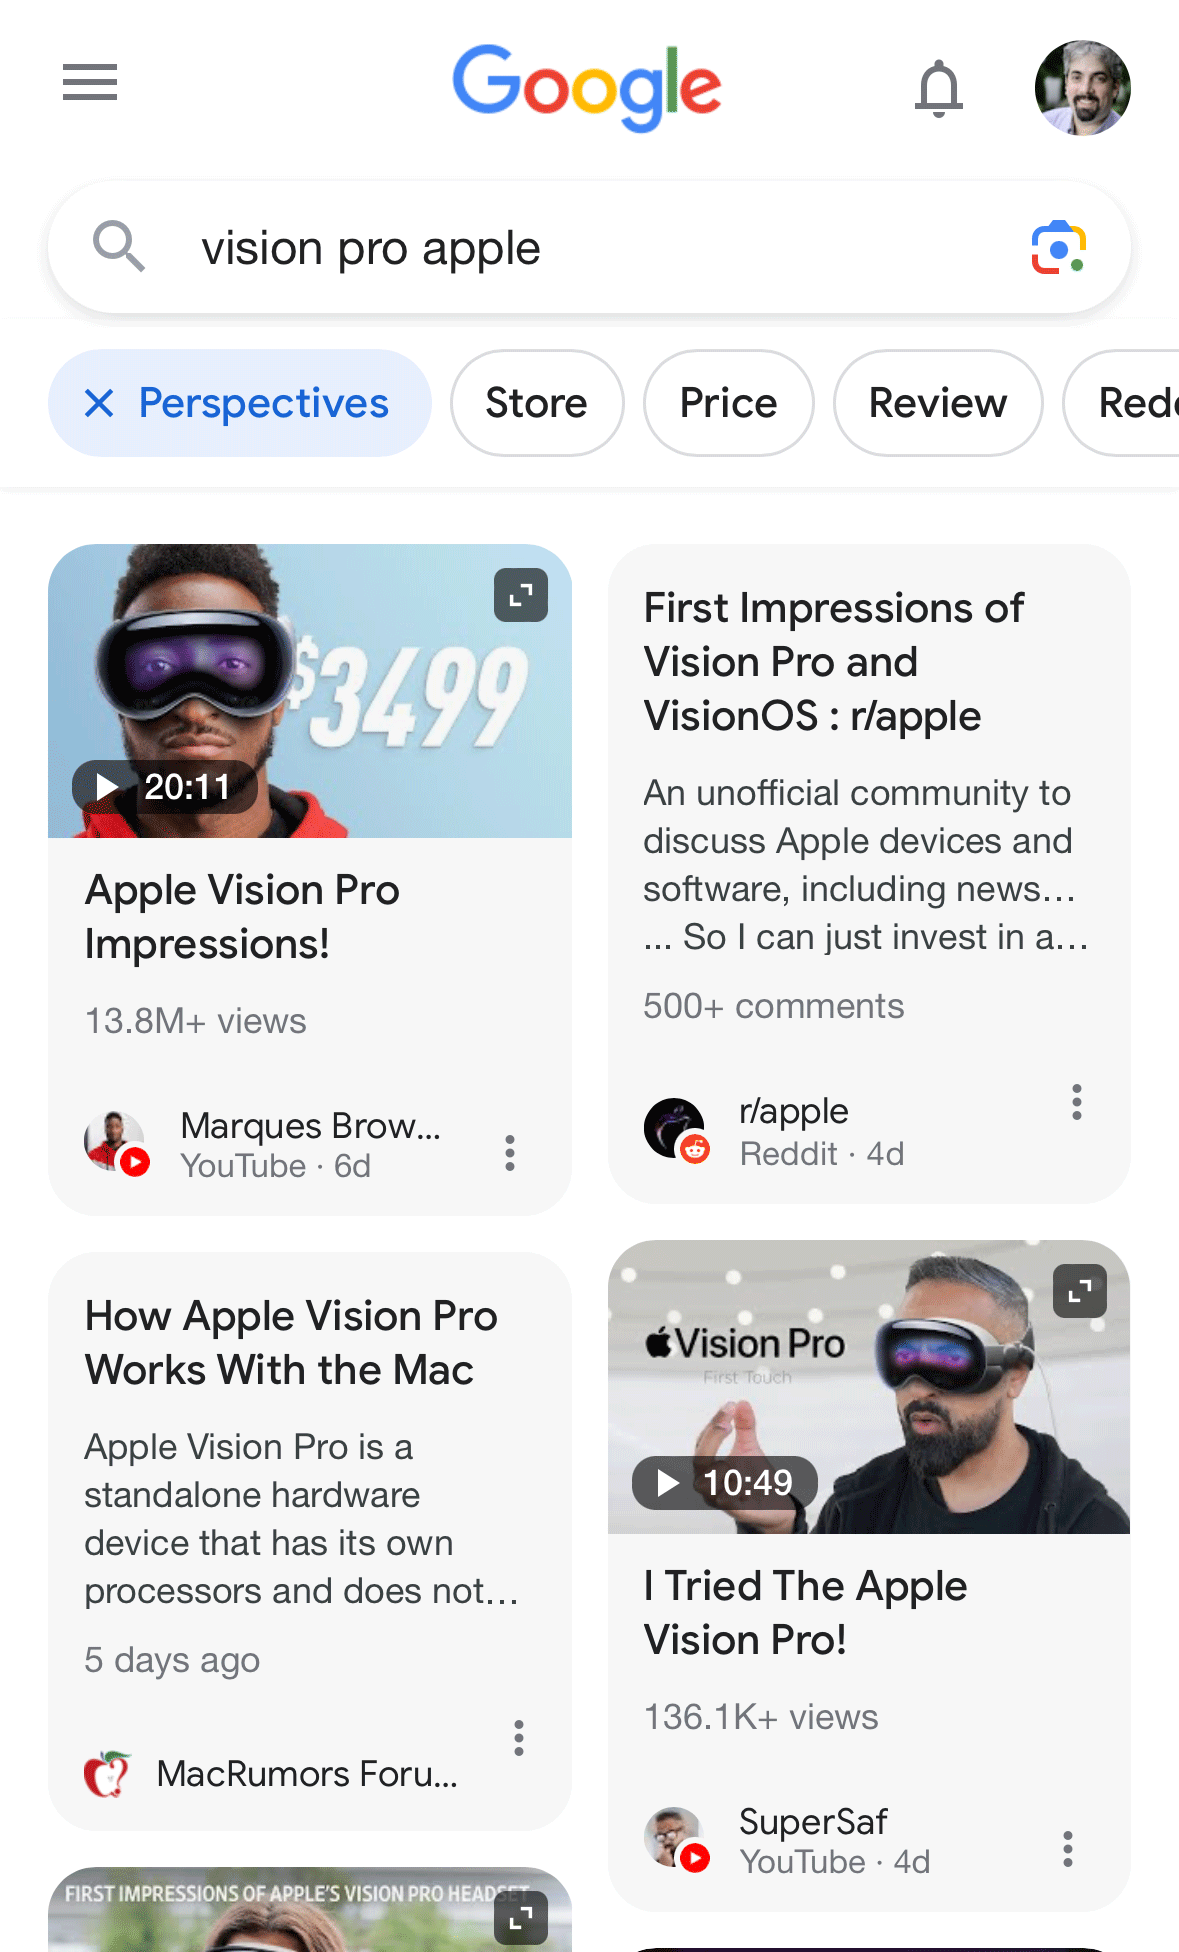 Google Perspectives filter example mobile search results using 'vision pro apple' search